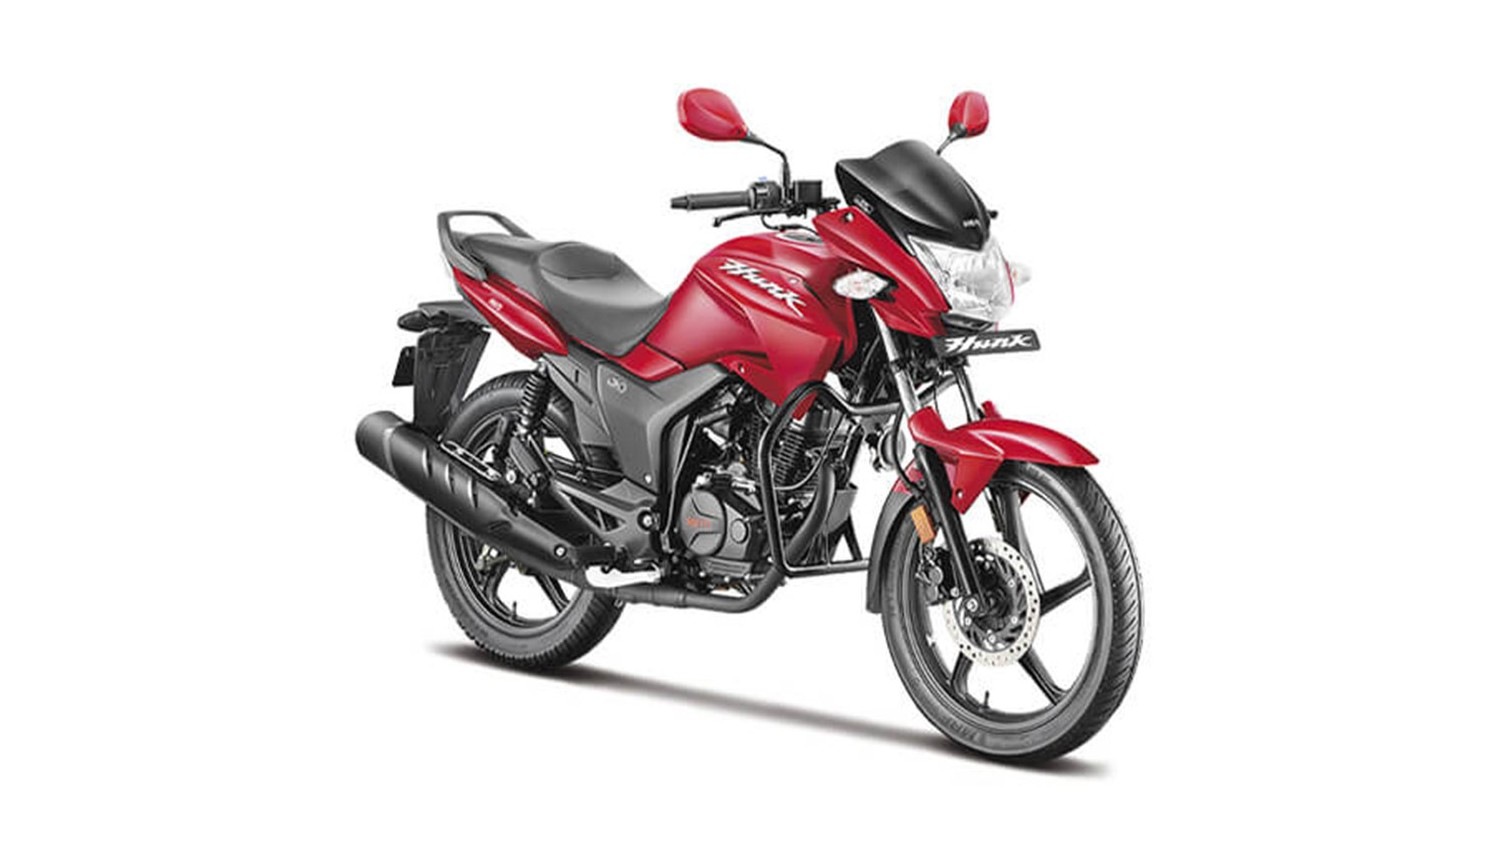 Hero MotoCorp has opened its first exclusive store in Costa Rica with four more planned to open soon